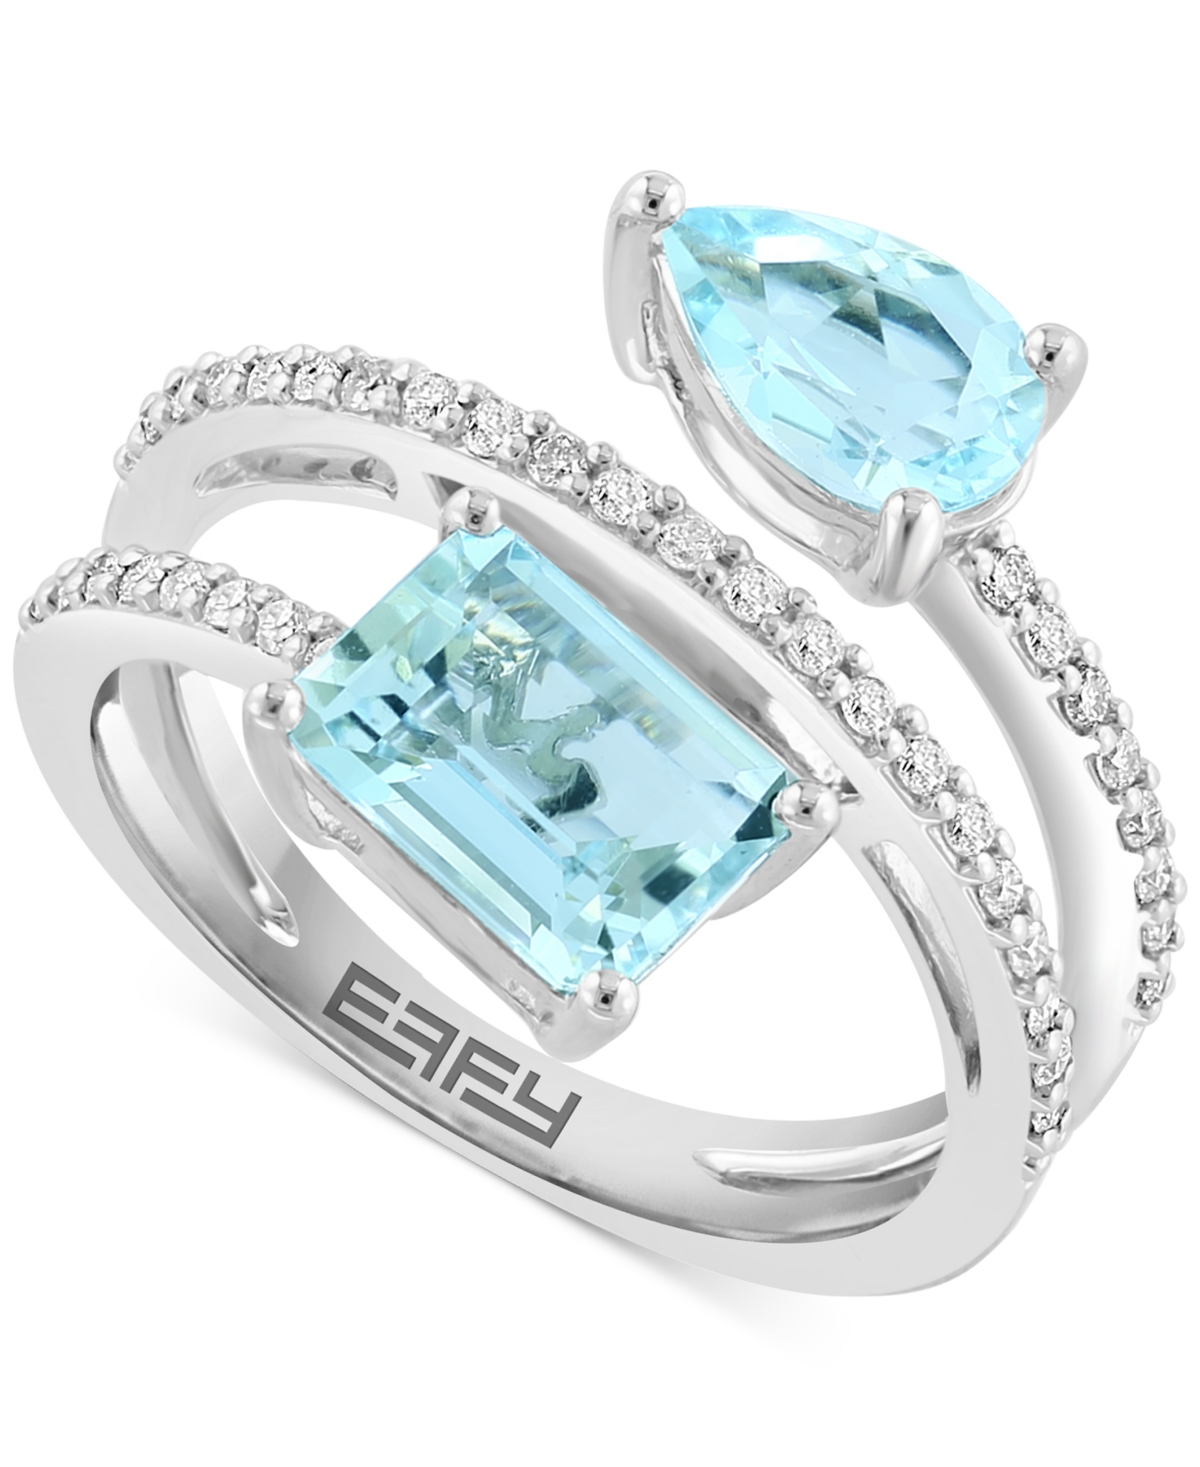 Effy Collection Effy Aquamarine (2-1/3 ct. t.w.) & Diamond (1/4 ct. t.w.) Coil Ring in 14k White Gold